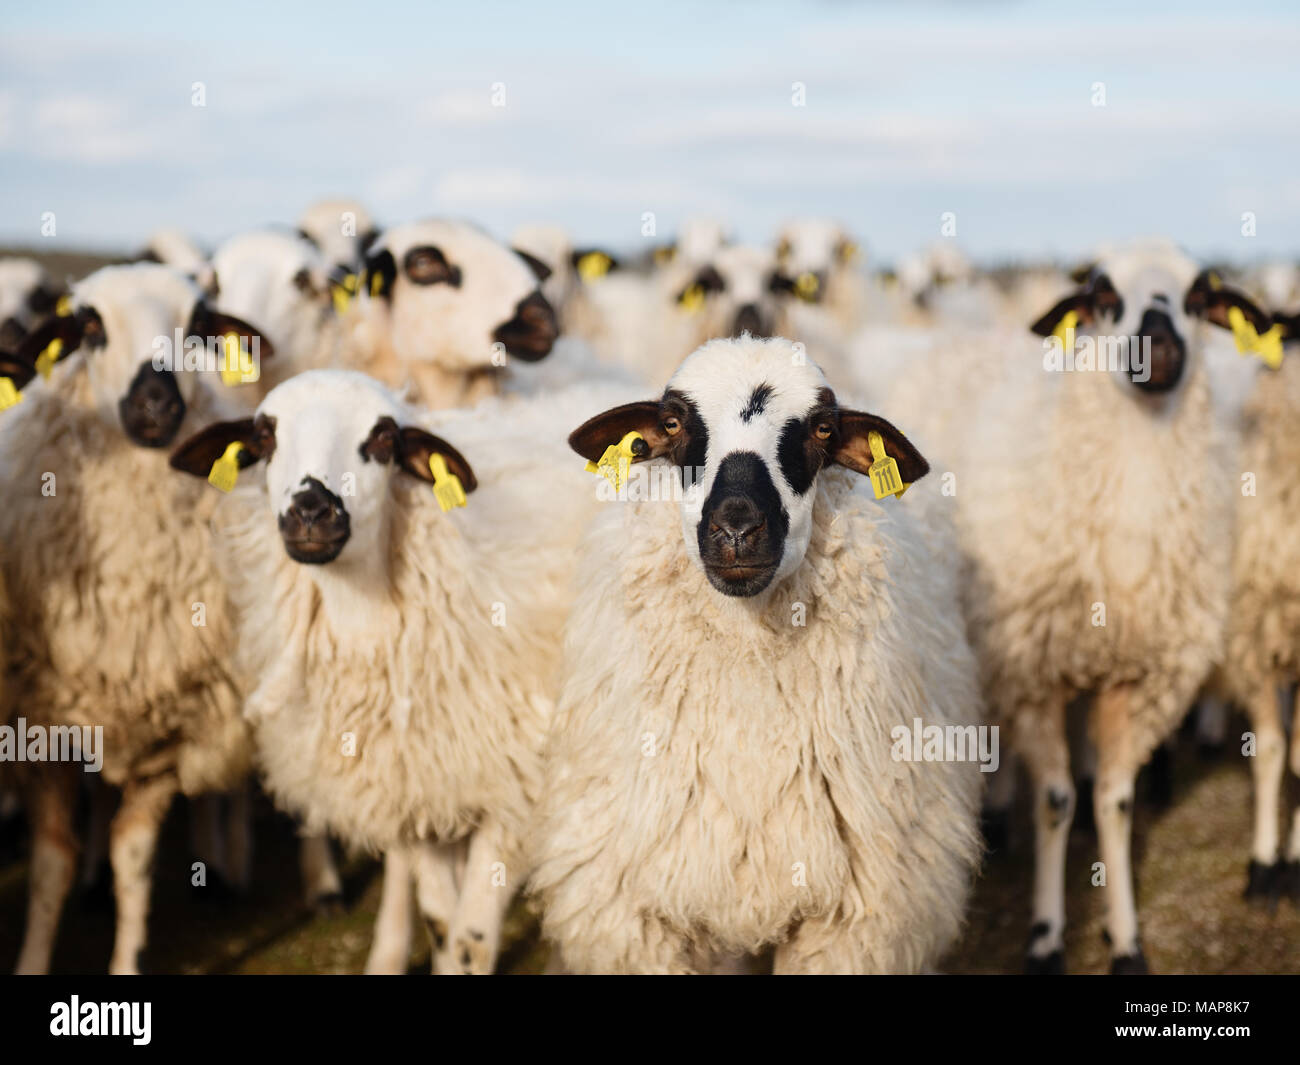 Herd of sheep grazing on field with grass. Stock Photo